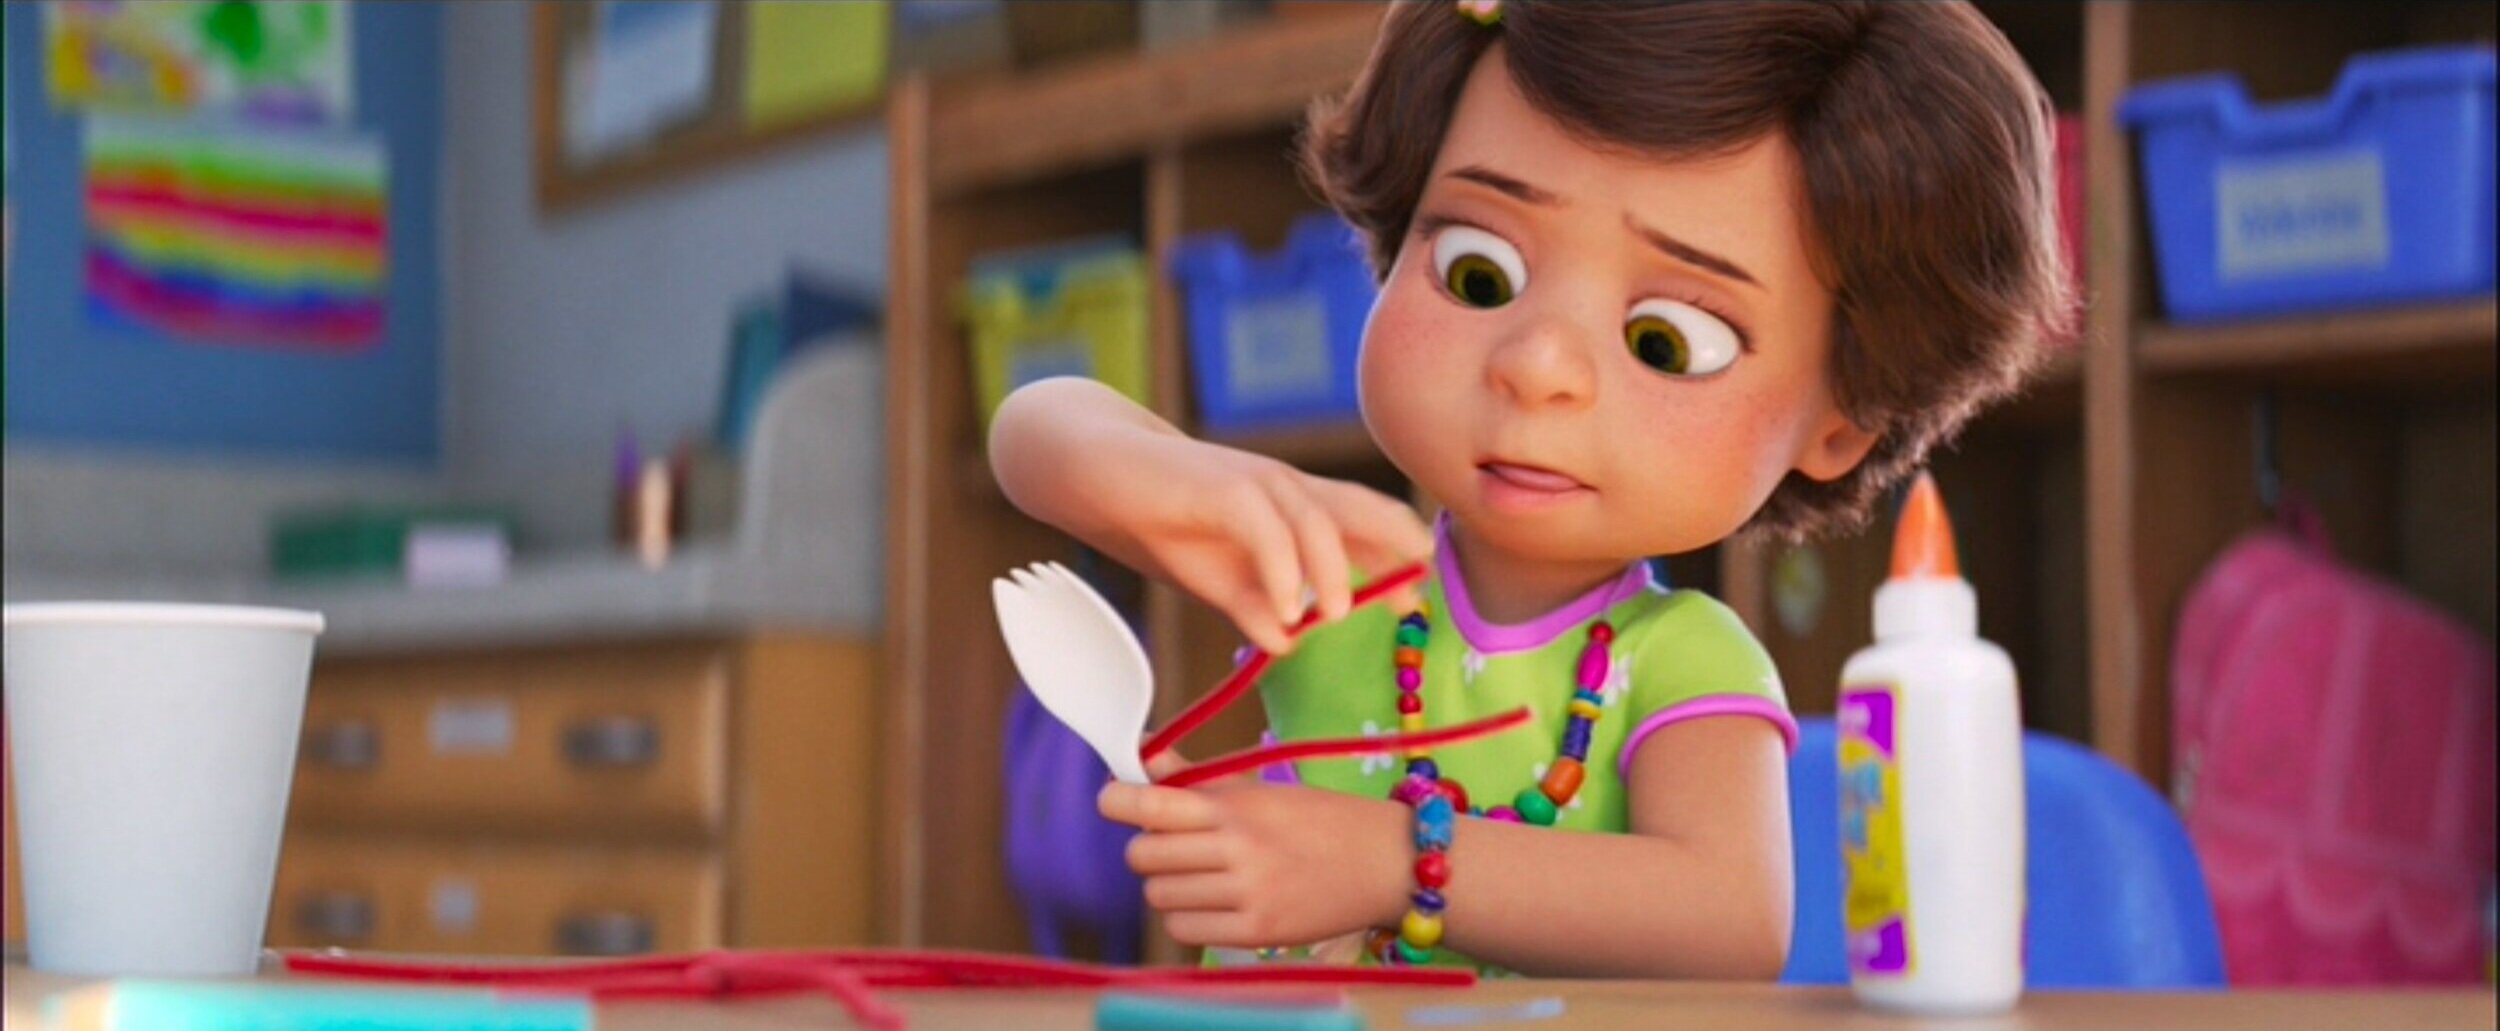 Animating Plastic in the Toy Story Films — Fantasy/Animation